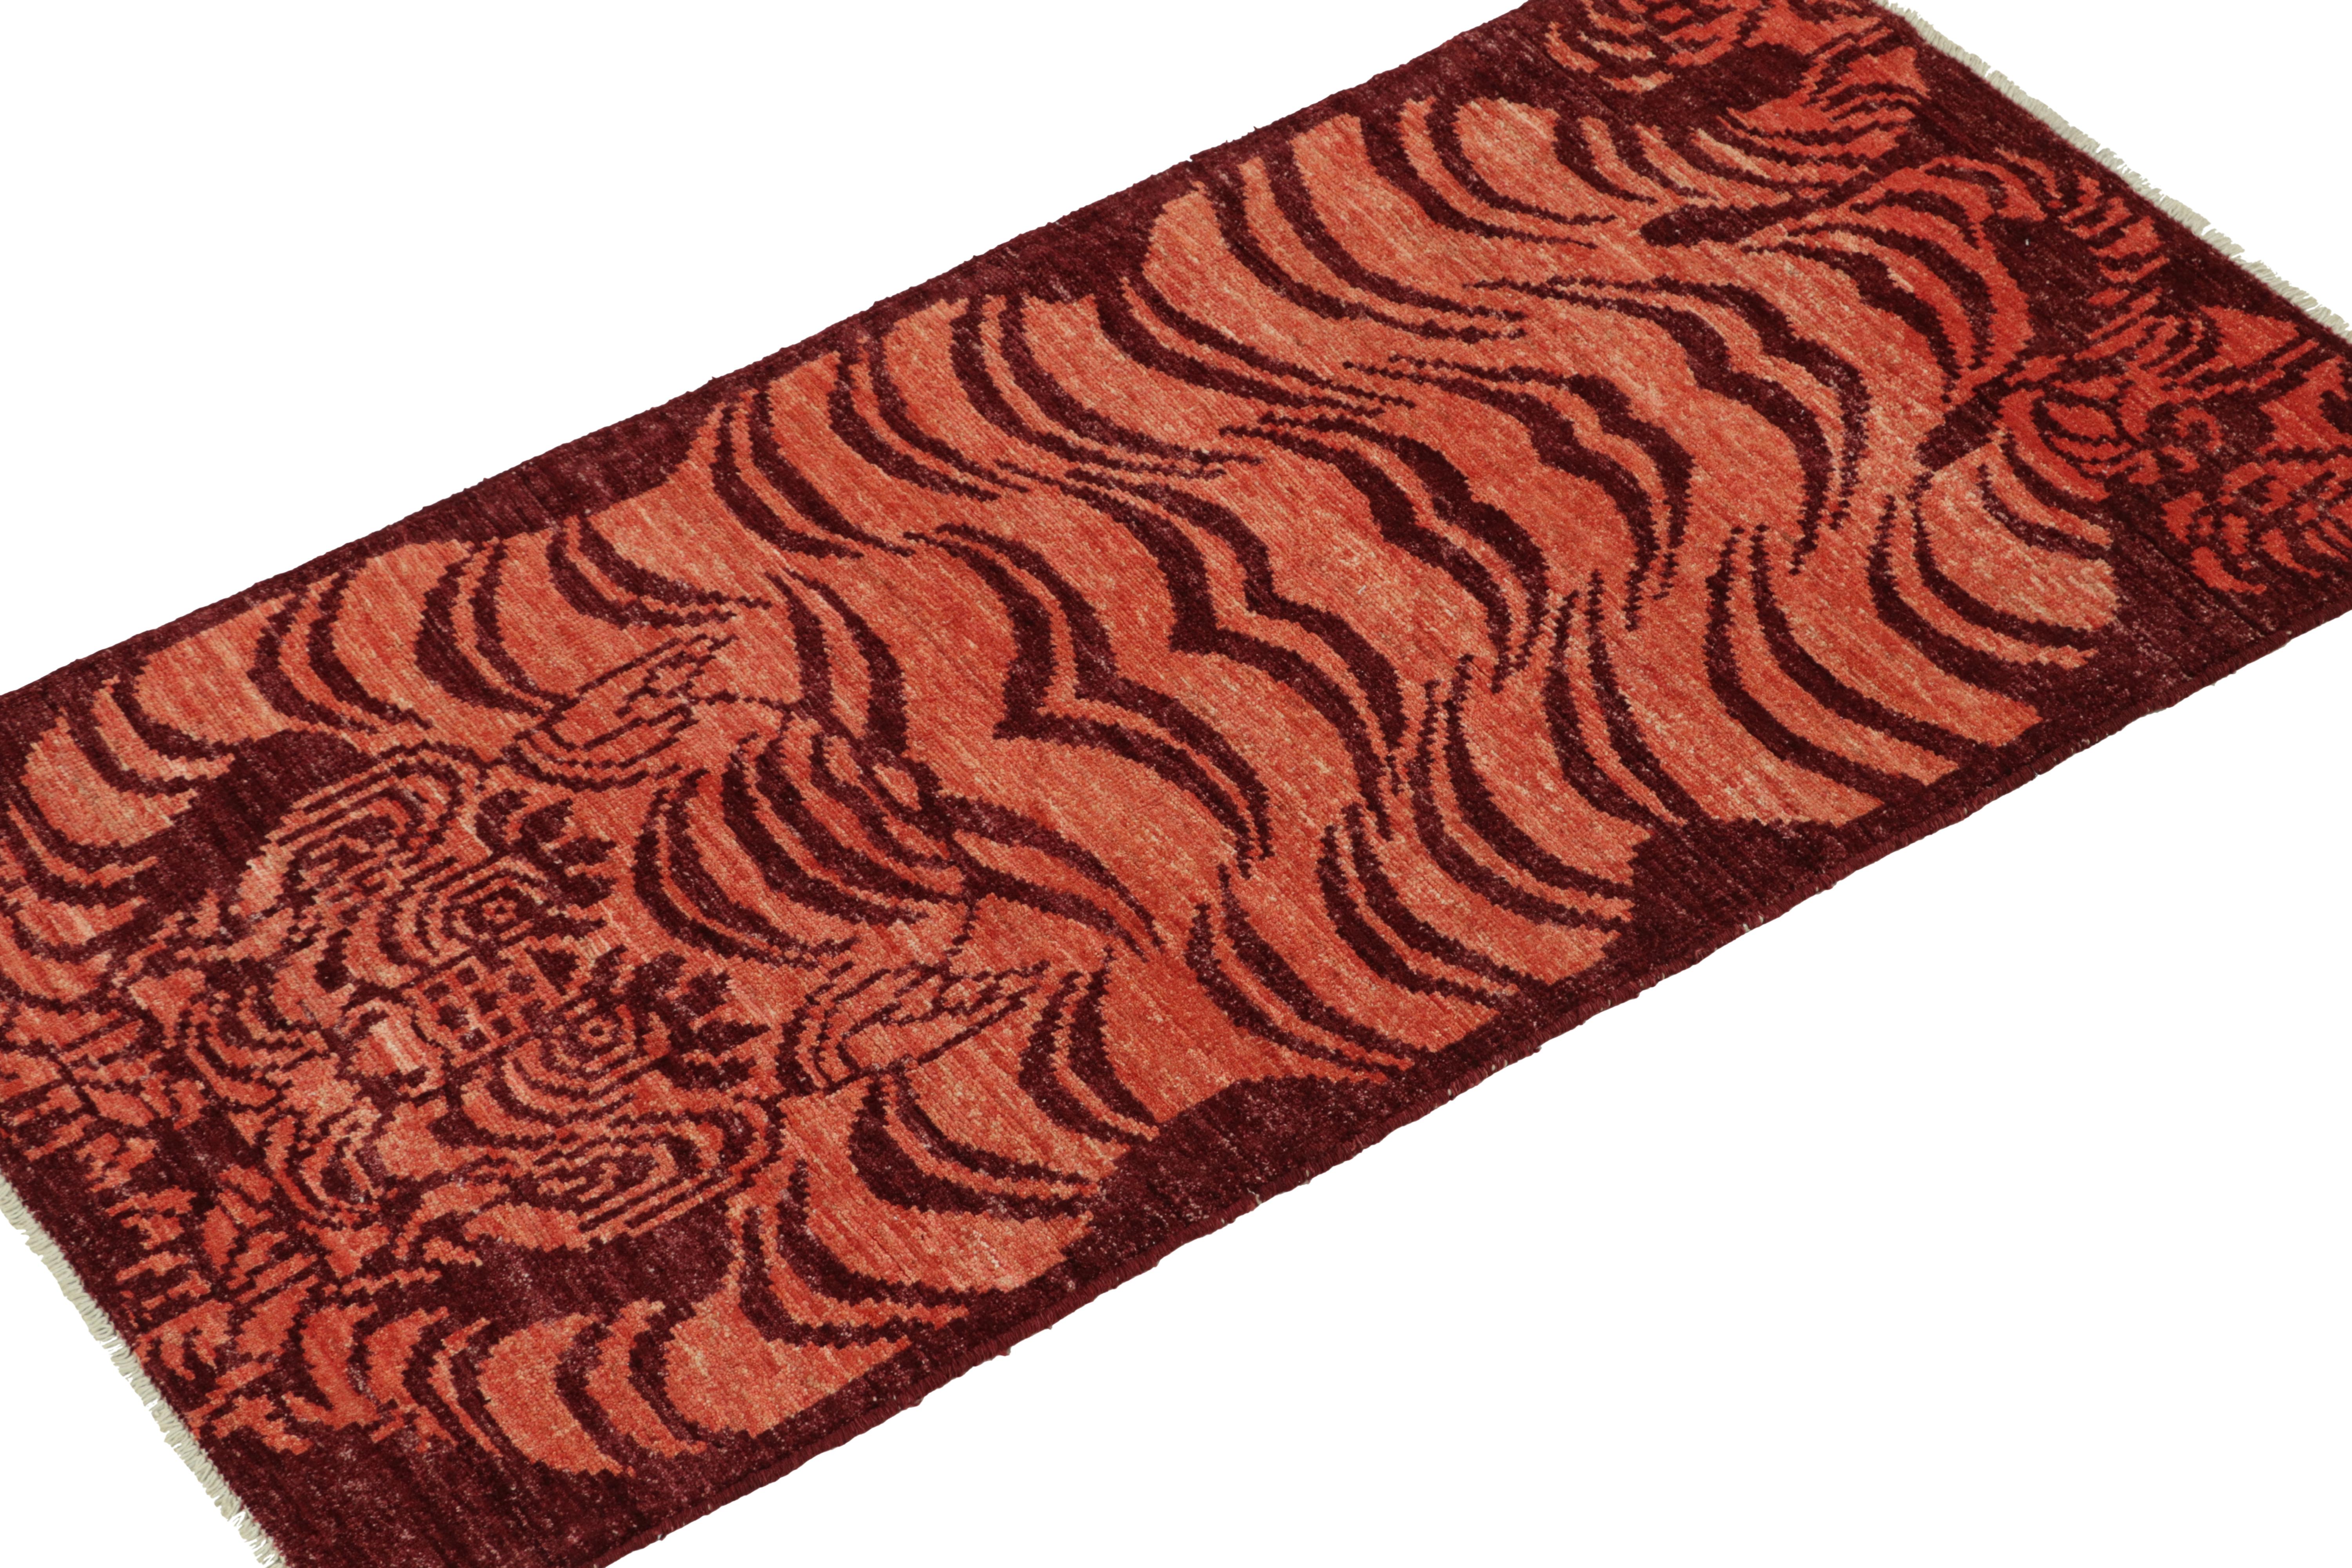 This new 3x6 runner is a grand entry in Rug & Kilim’s Modern Classics Collection. Hand-knotted in all wool.

Further on the Design:

This design recaptures tiger skin pictorial in a bold play of tones of red and orange with a fiery presence.